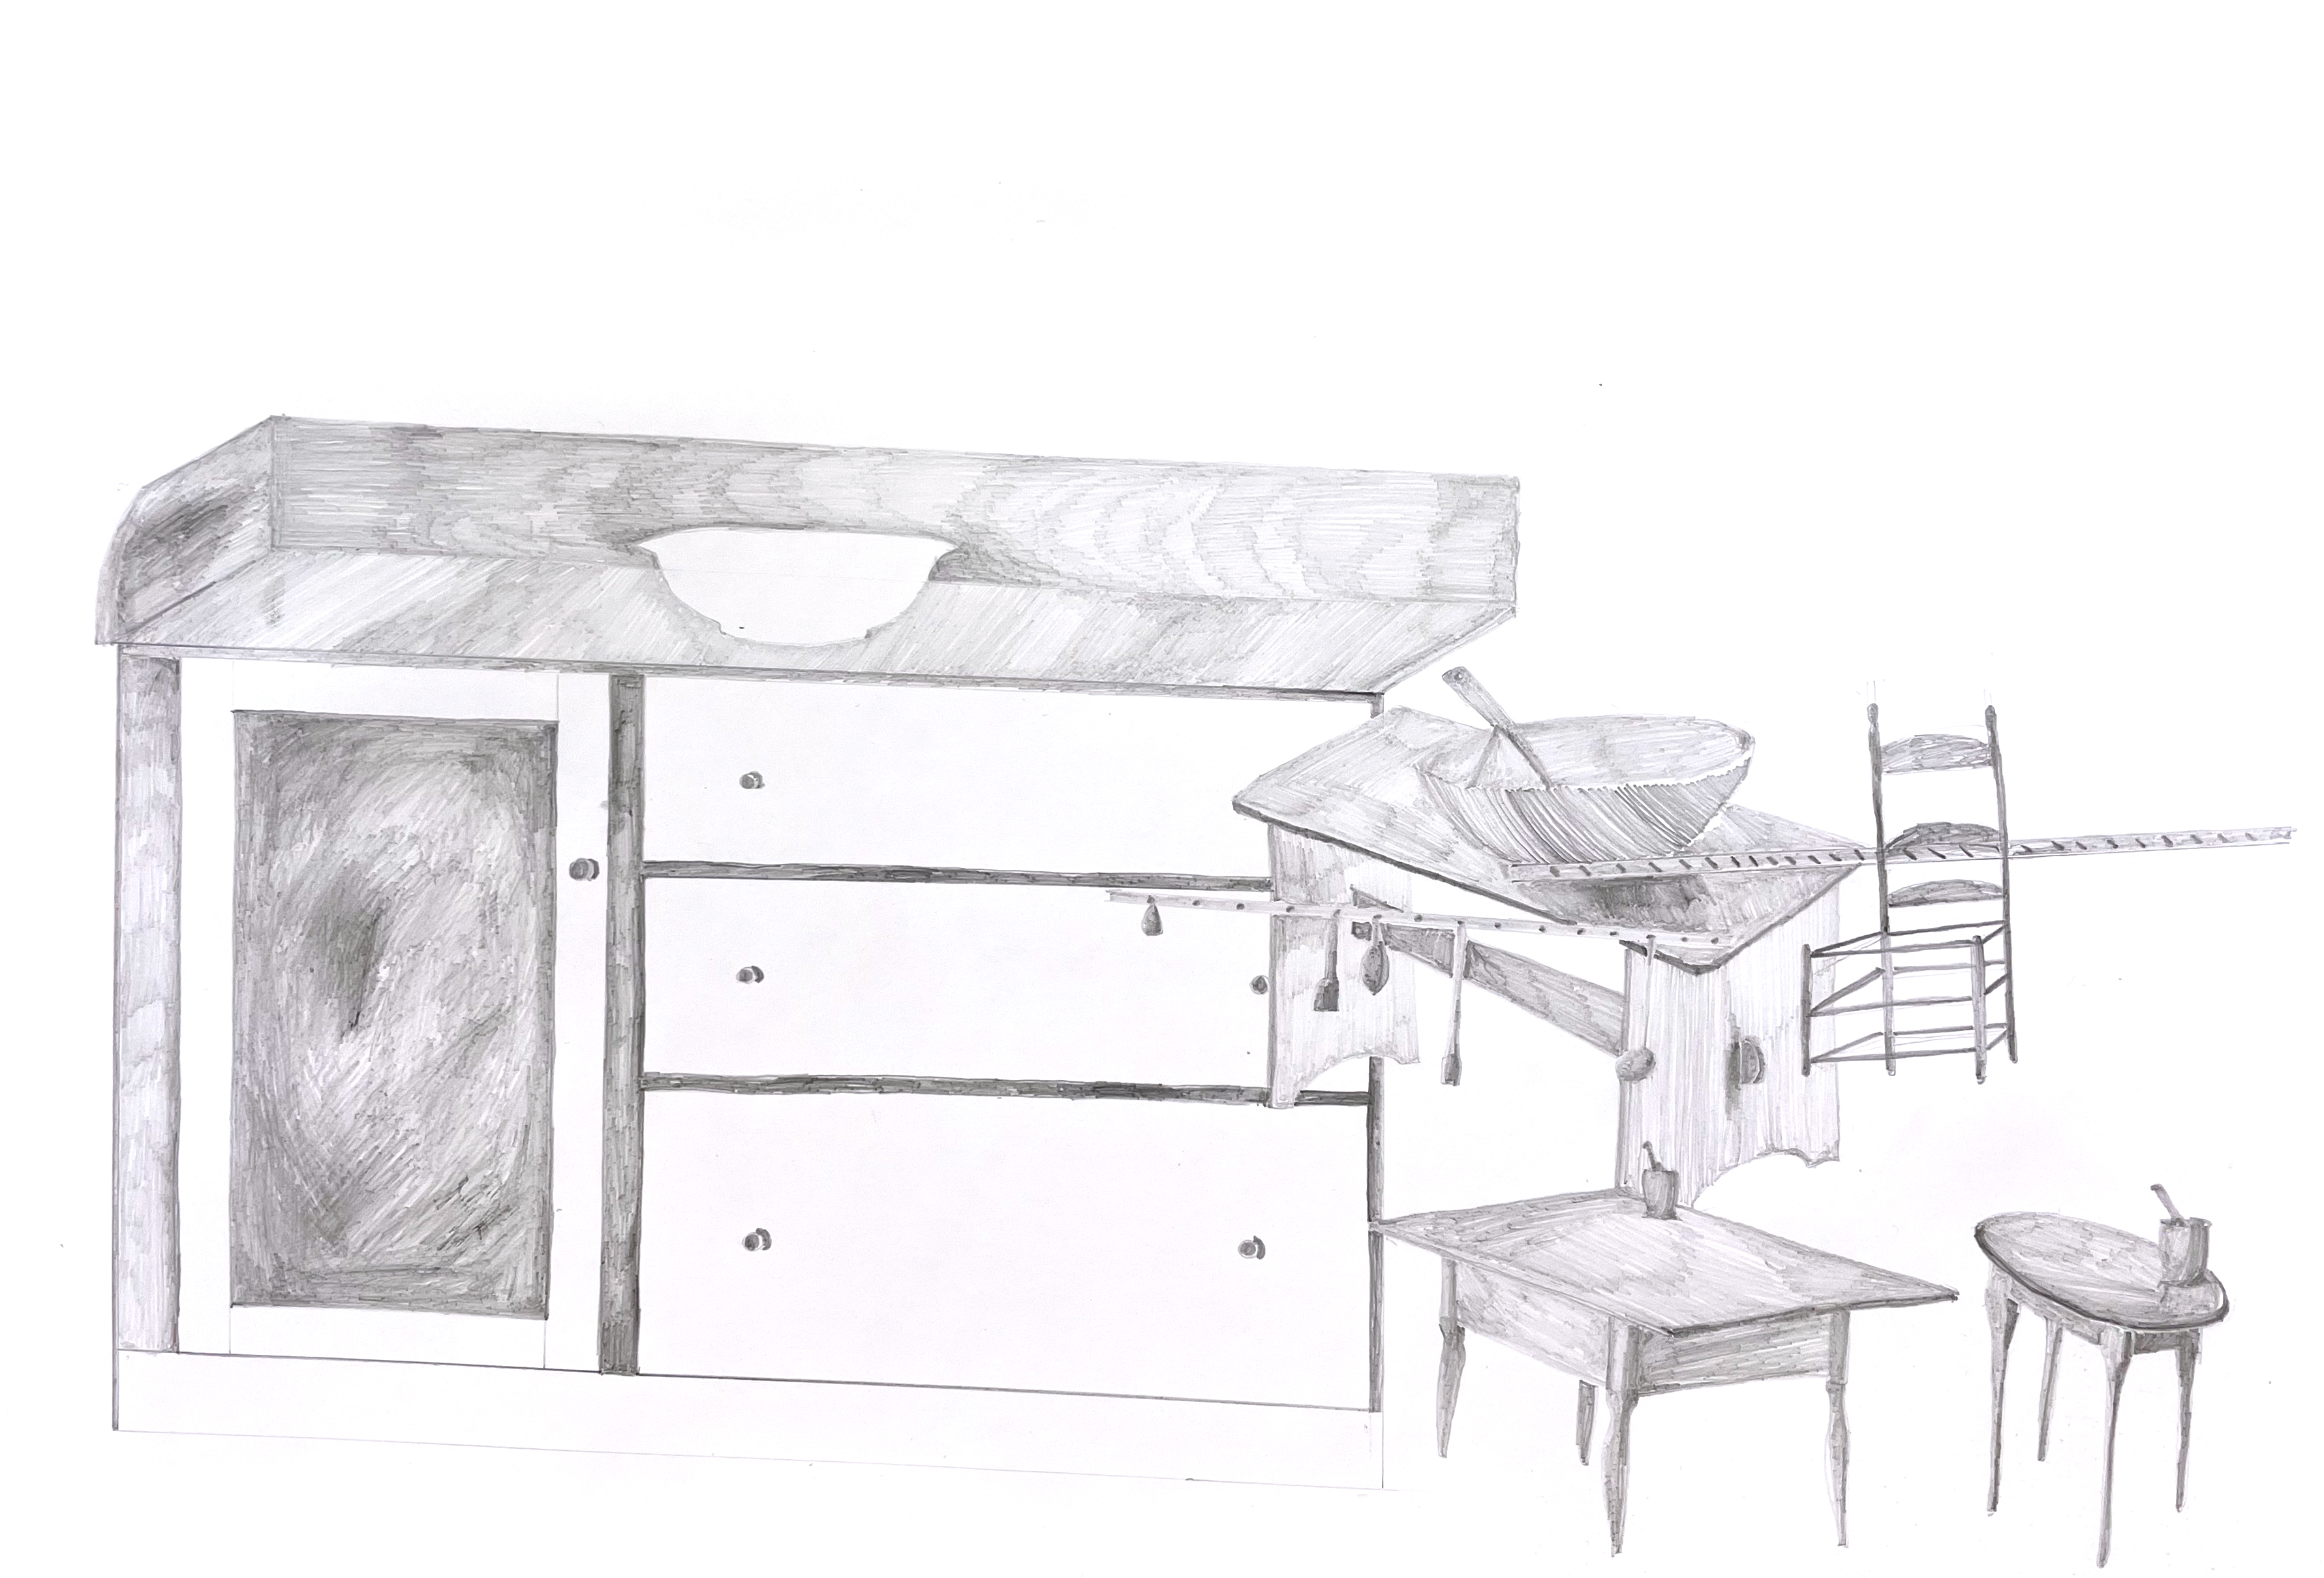 pencil drawings of shaker furniture in various sizes sit across the page, overlapping each other